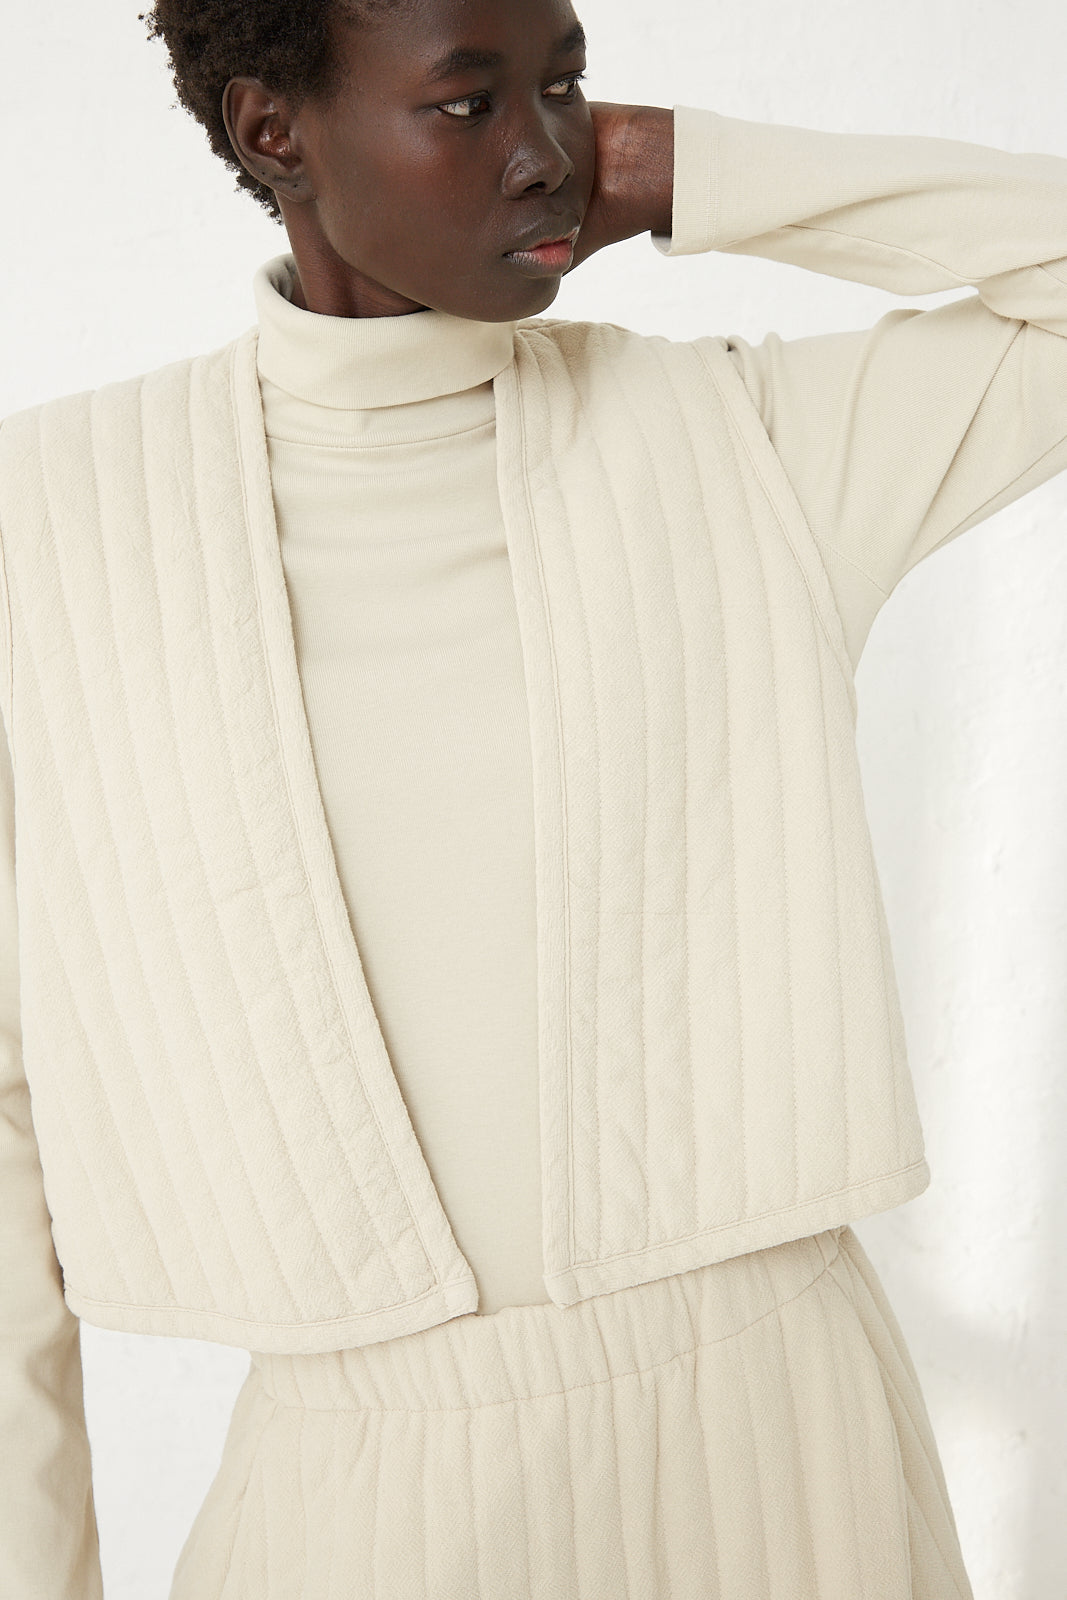 The model is wearing a cream turtleneck and quilted pants from an open Quilted Vest in Ivory, Black Crane.